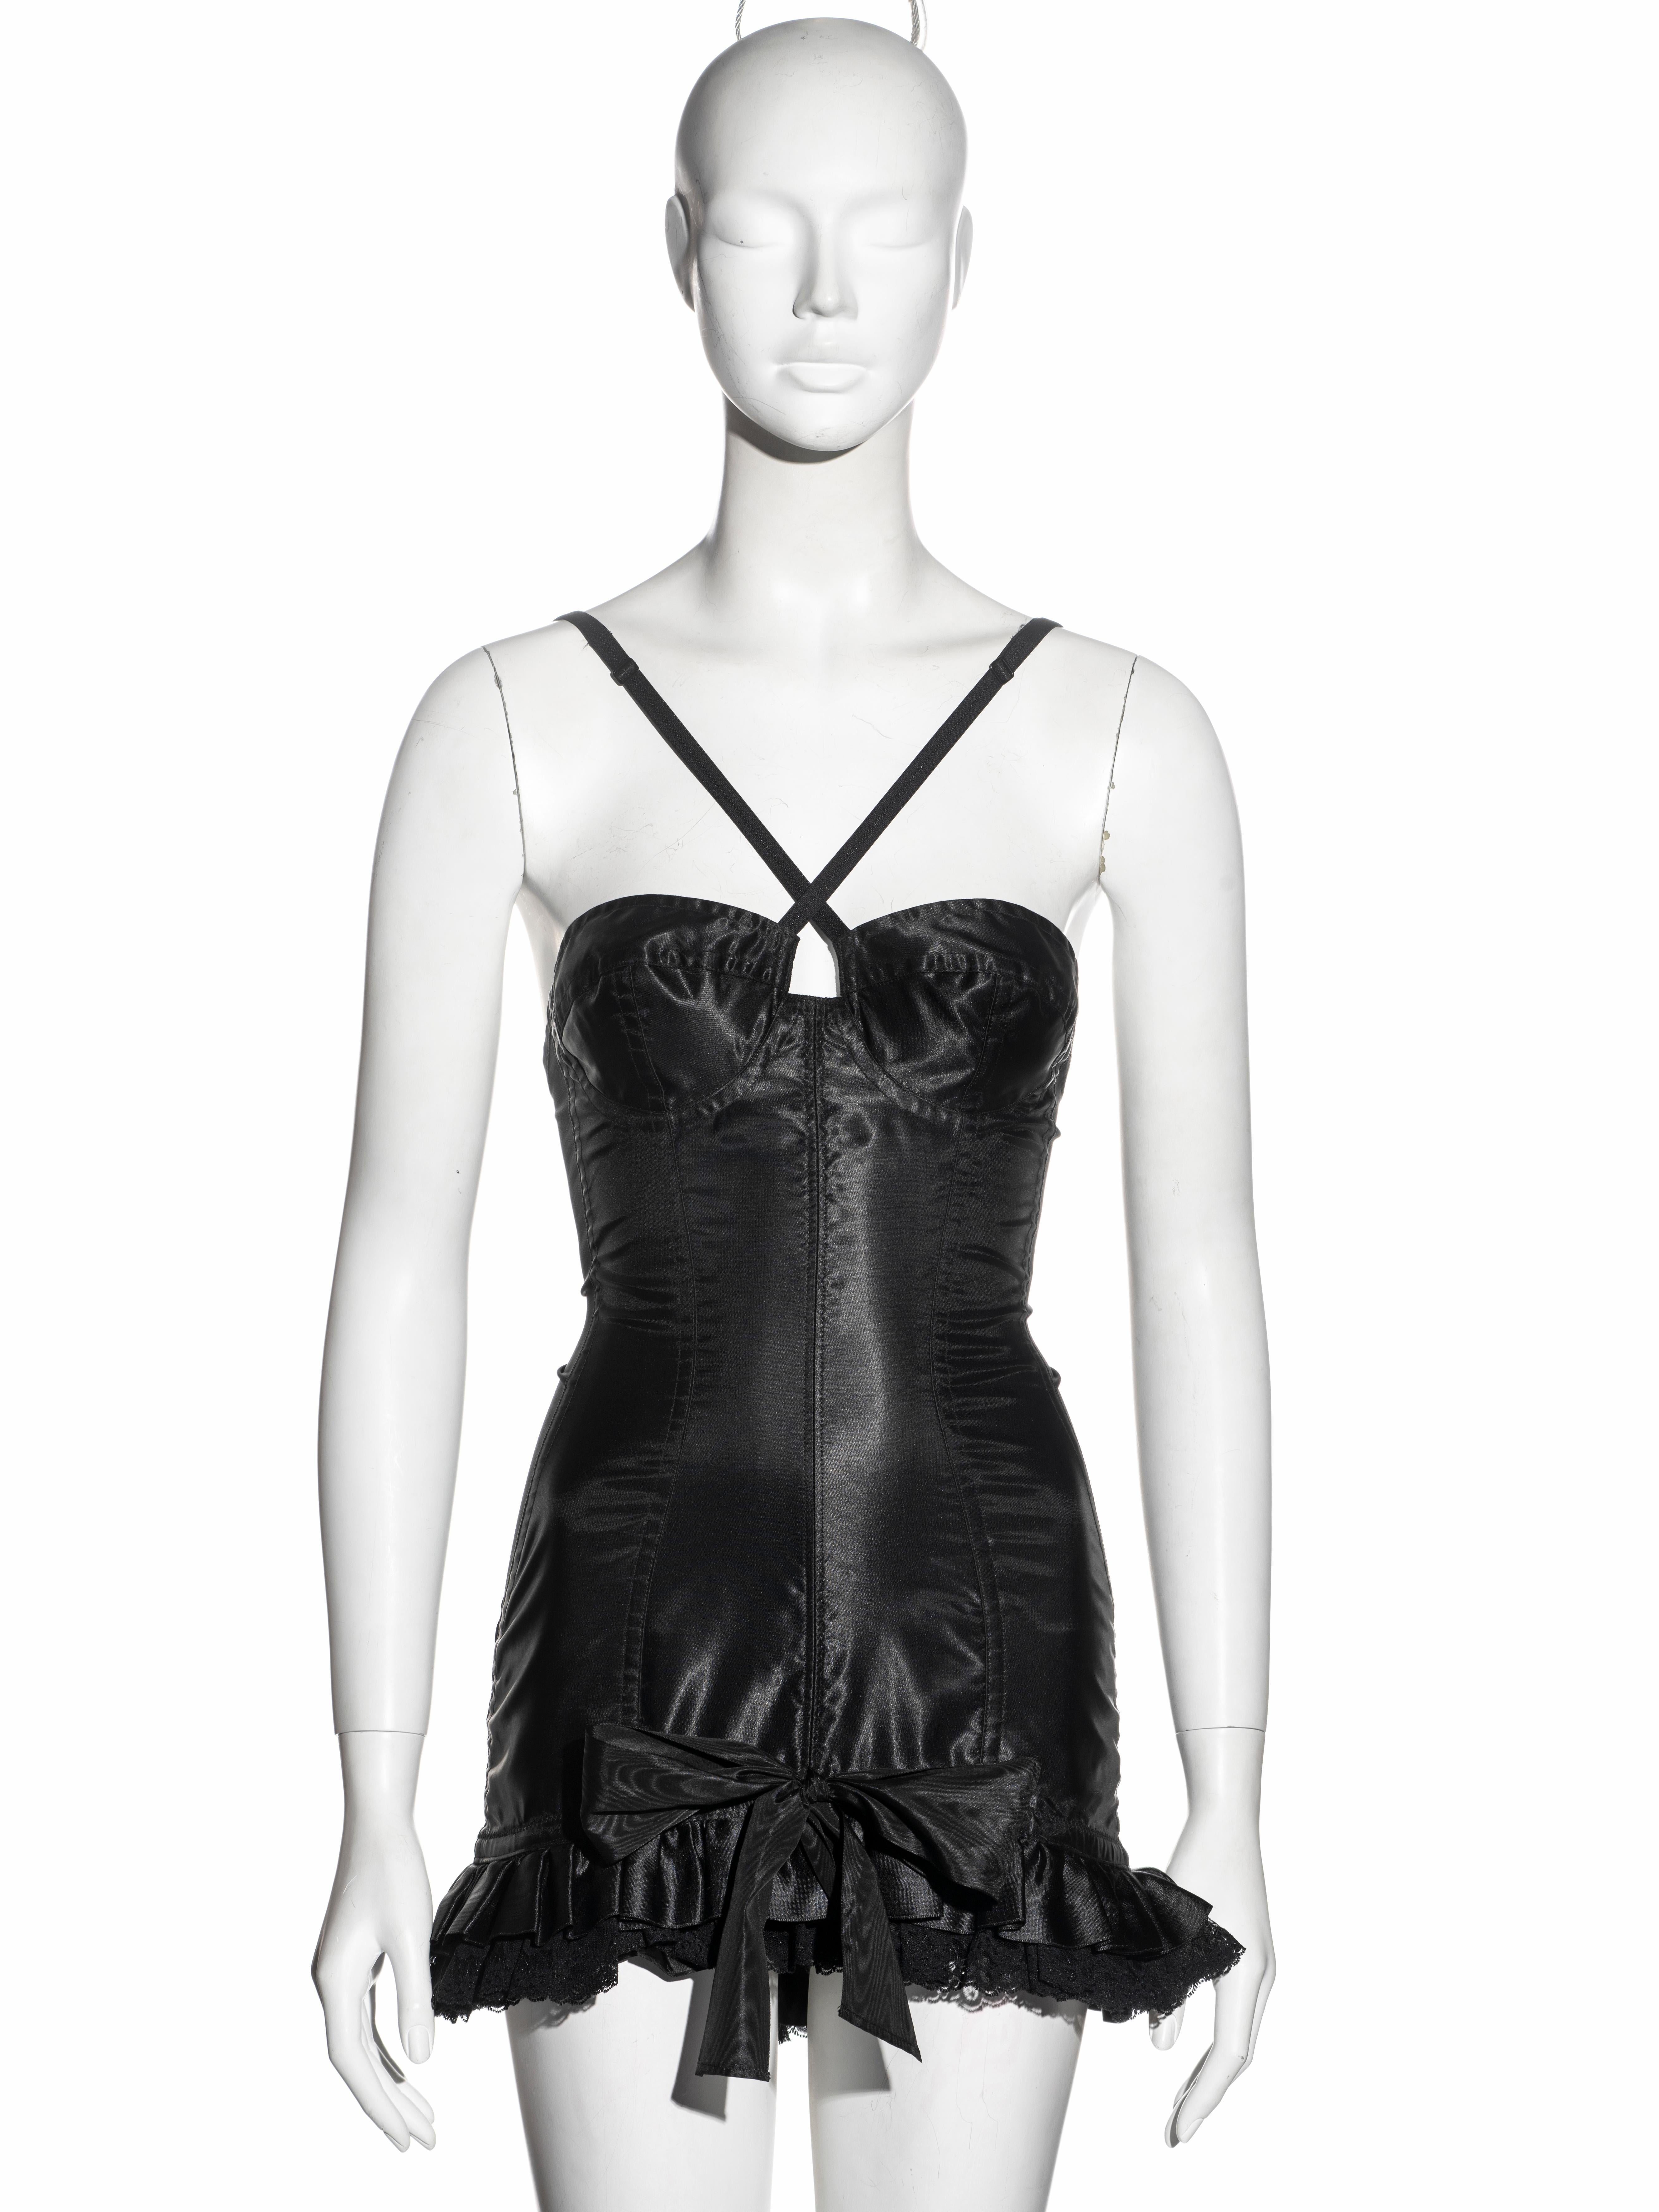 ▪ Dolce & Gabbana corset 'Pin-Up' mini dress
▪ Black satin and spandex 
▪ Ruffled hem with lace underlay 
▪ Moiré ribbon bow 
▪ Metal corset hooks at the centre-back opening 
▪ Adjustable shoulder straps criss-cross at the front 
▪ IT 40 - FR 36 -